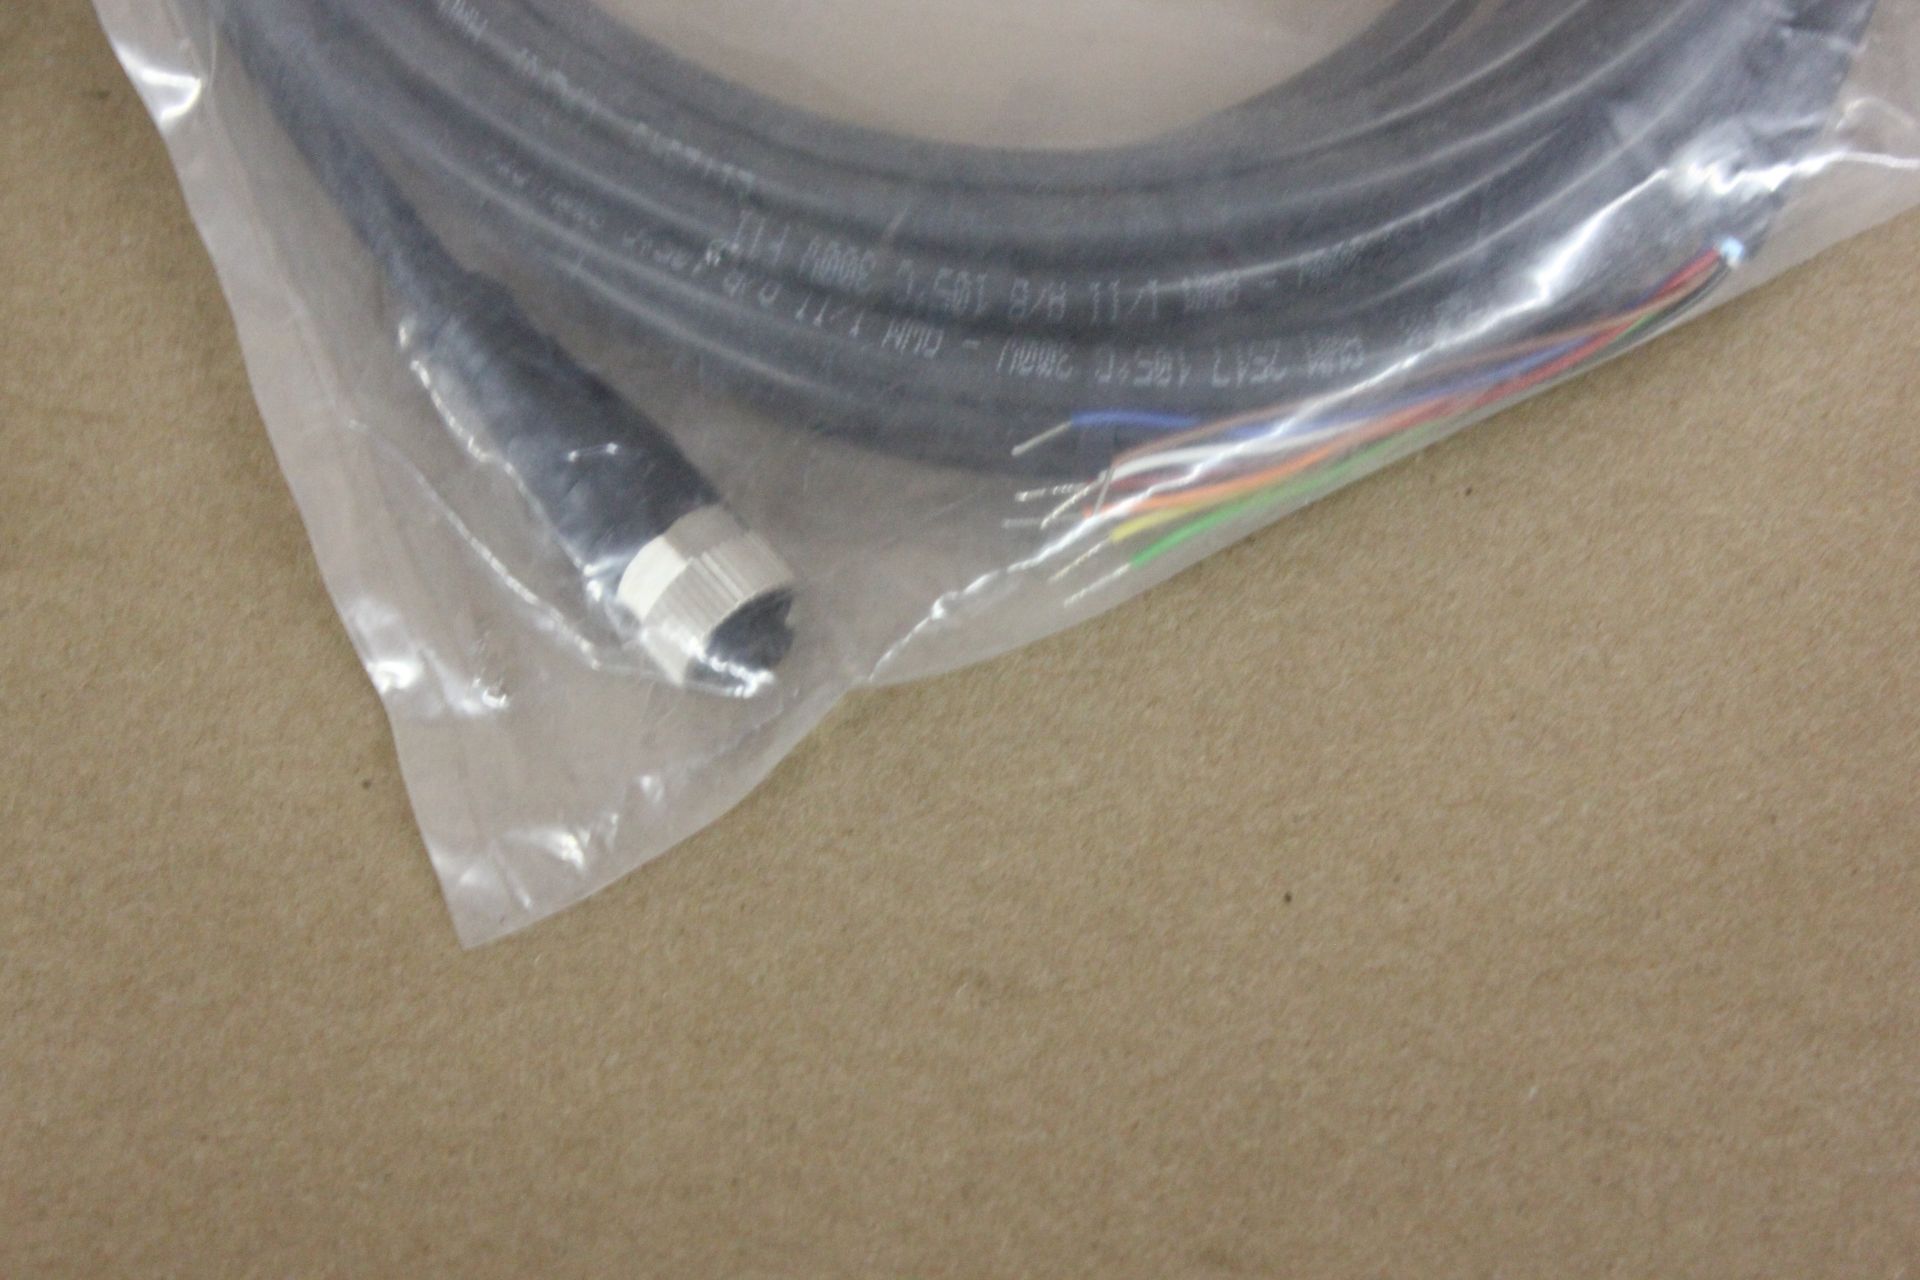 LOT OF NEW AUTOMATION DIRECT SAFETY INTERLOCK SWITCH CABLE ASSEMBLIES - Image 3 of 3